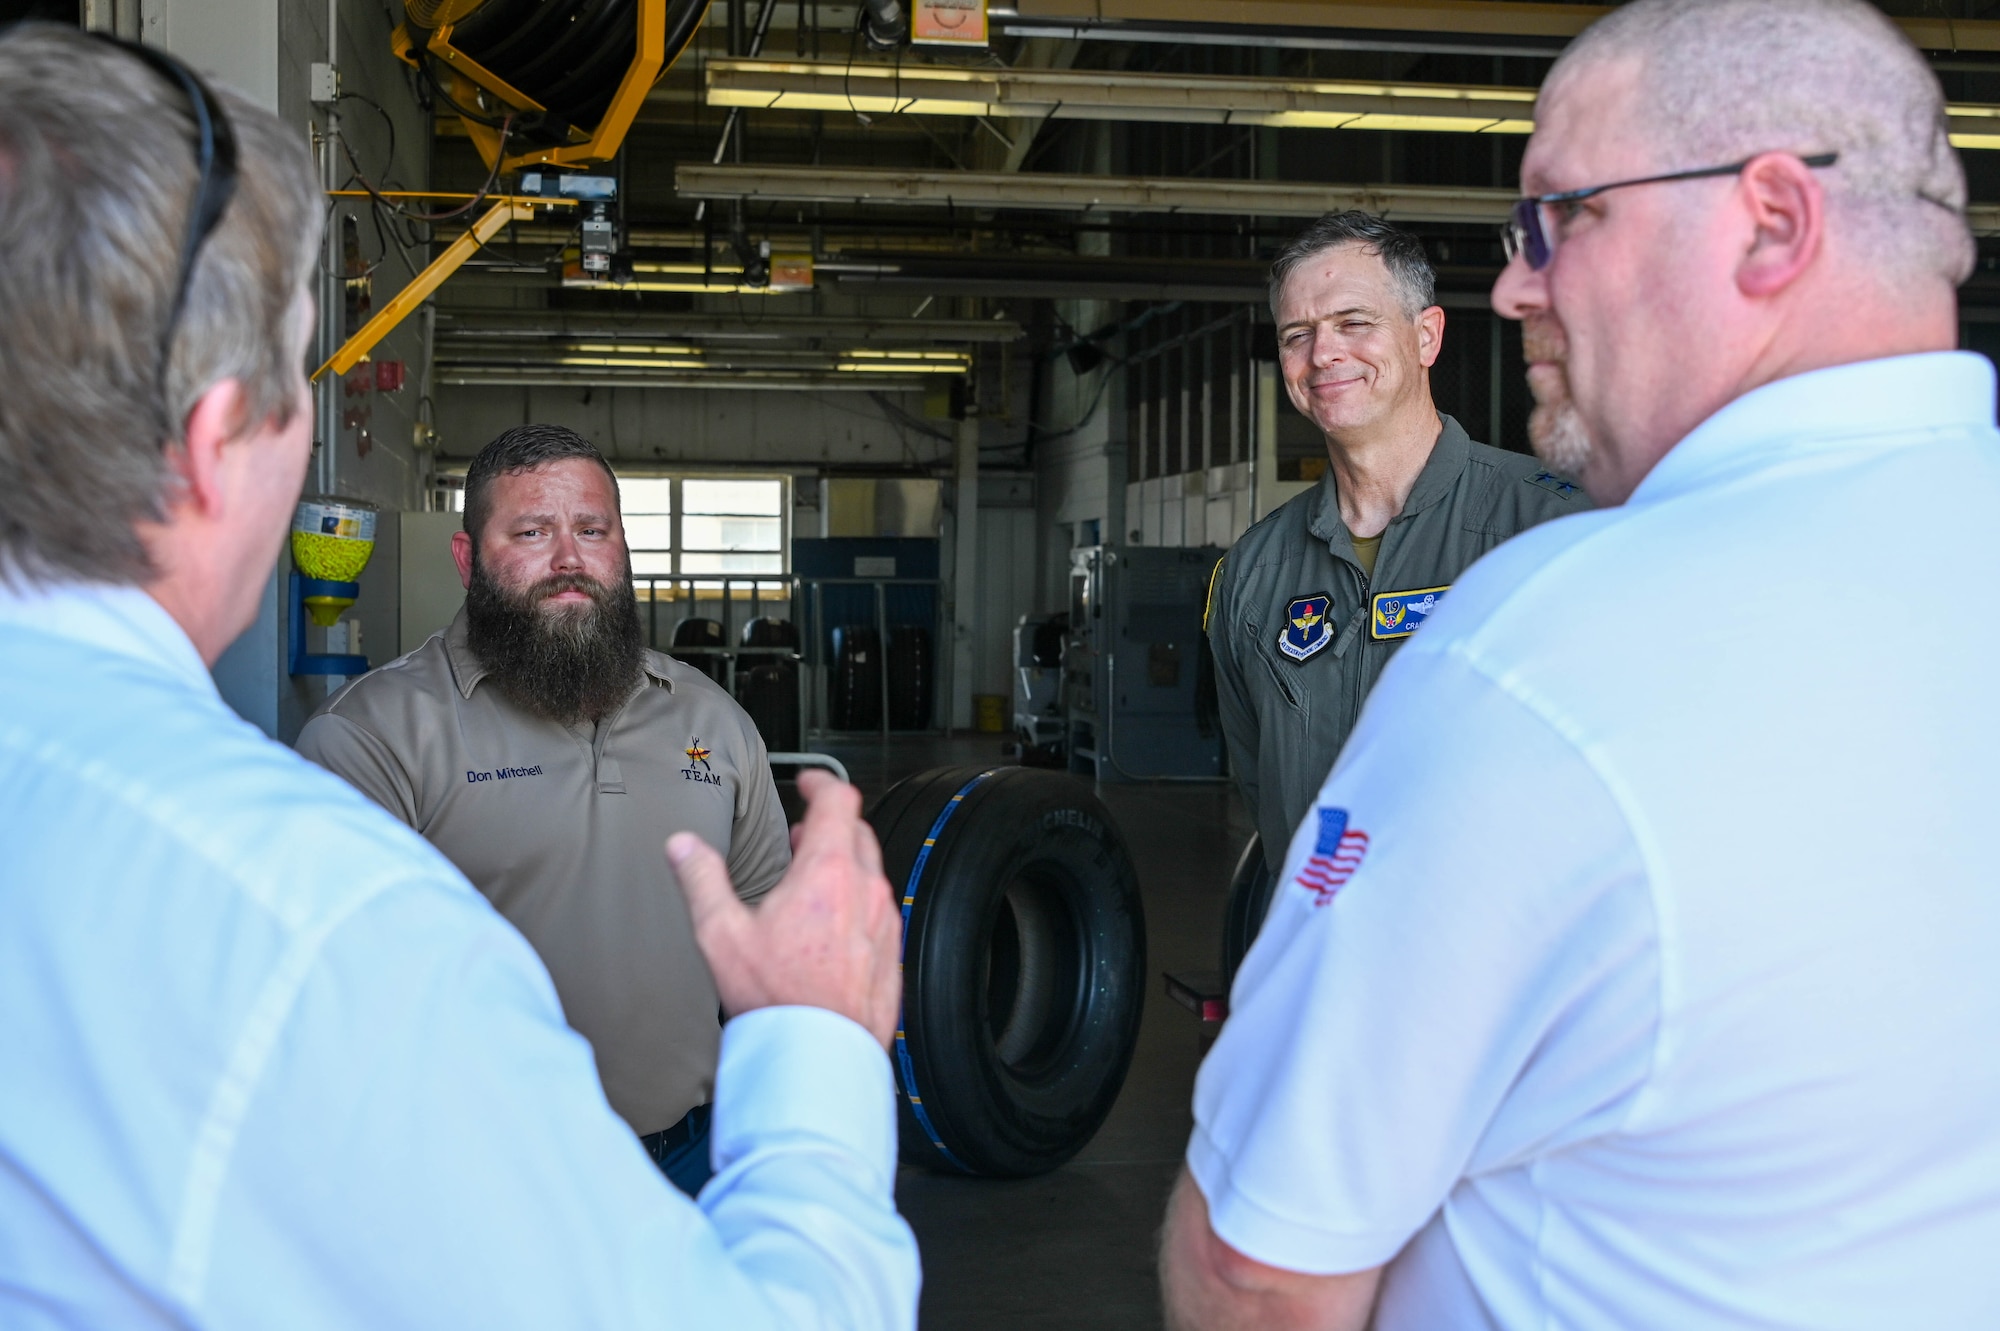 U.S. Air Force Maj. Gen. Craig D. Wills, 19th Air Force commander, takes a photo with 97th Maintenance Group members at Altus Air Force Base, Oklahoma, June 23, 2022. Wills visited the tire shop to learn about a new way of making KC-46 Pegasus tires. (U.S. Air Force photo by Senior Airman Kayla Christenson)